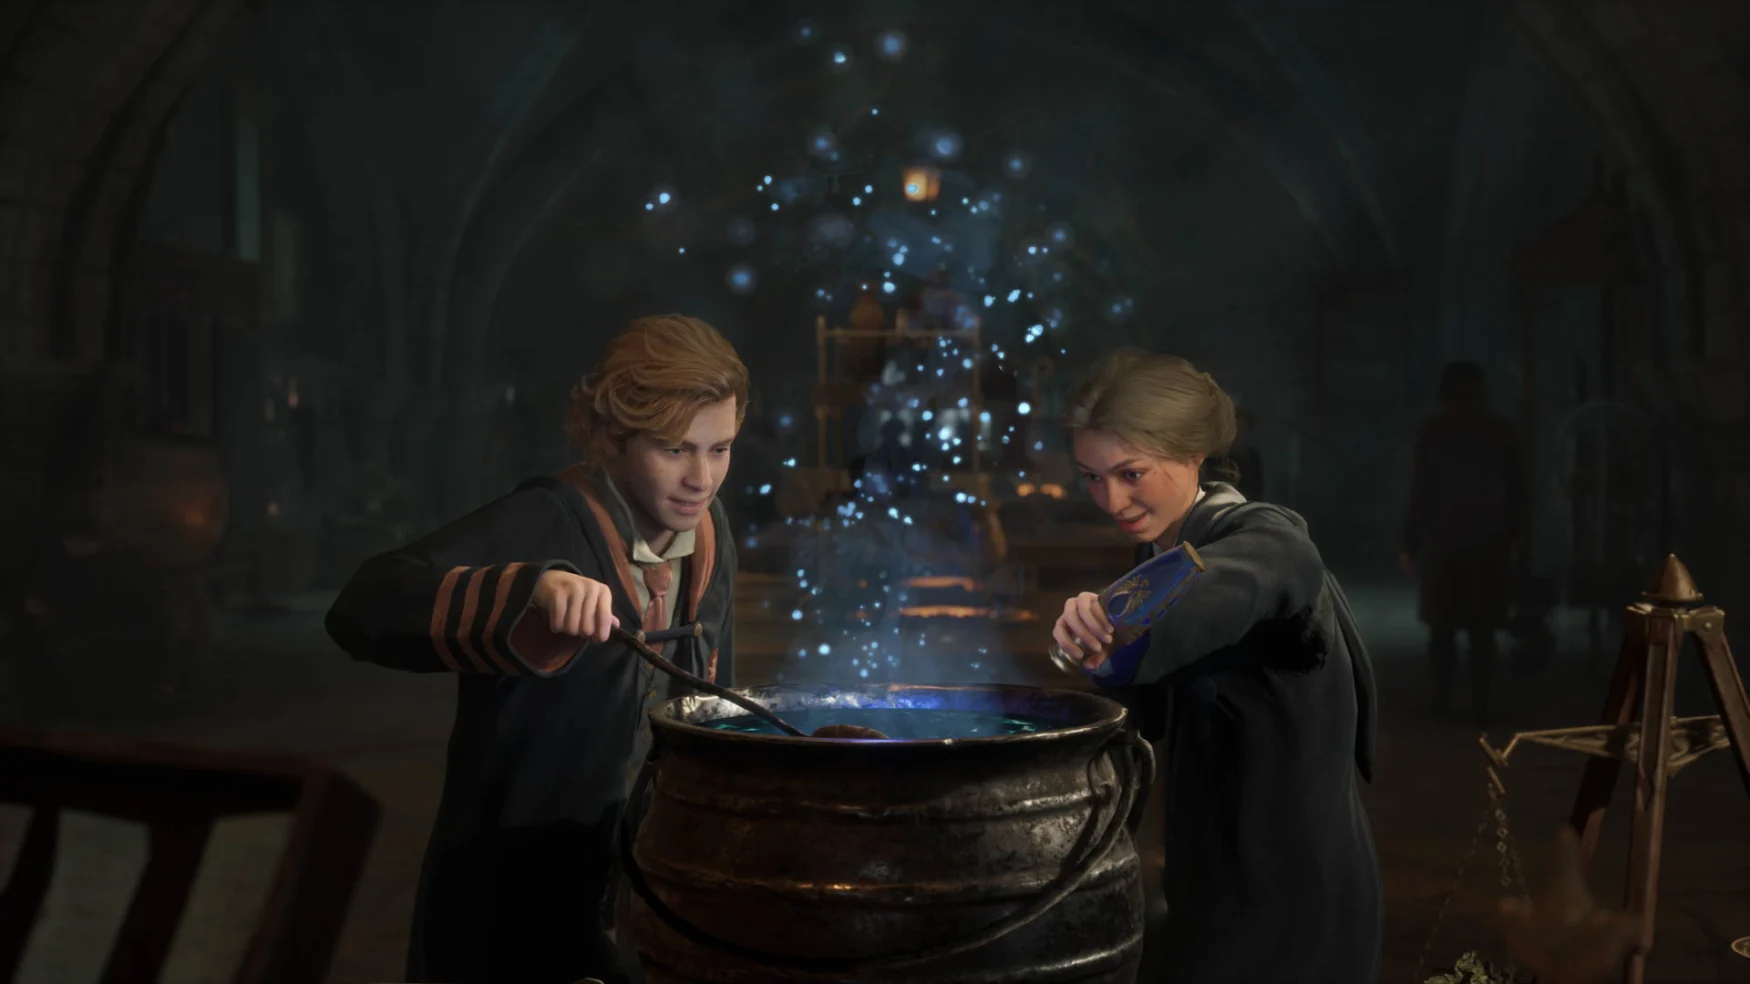 Two students in their Hogwarts uniforms mix up potions as blue smoke rises from the cauldron.